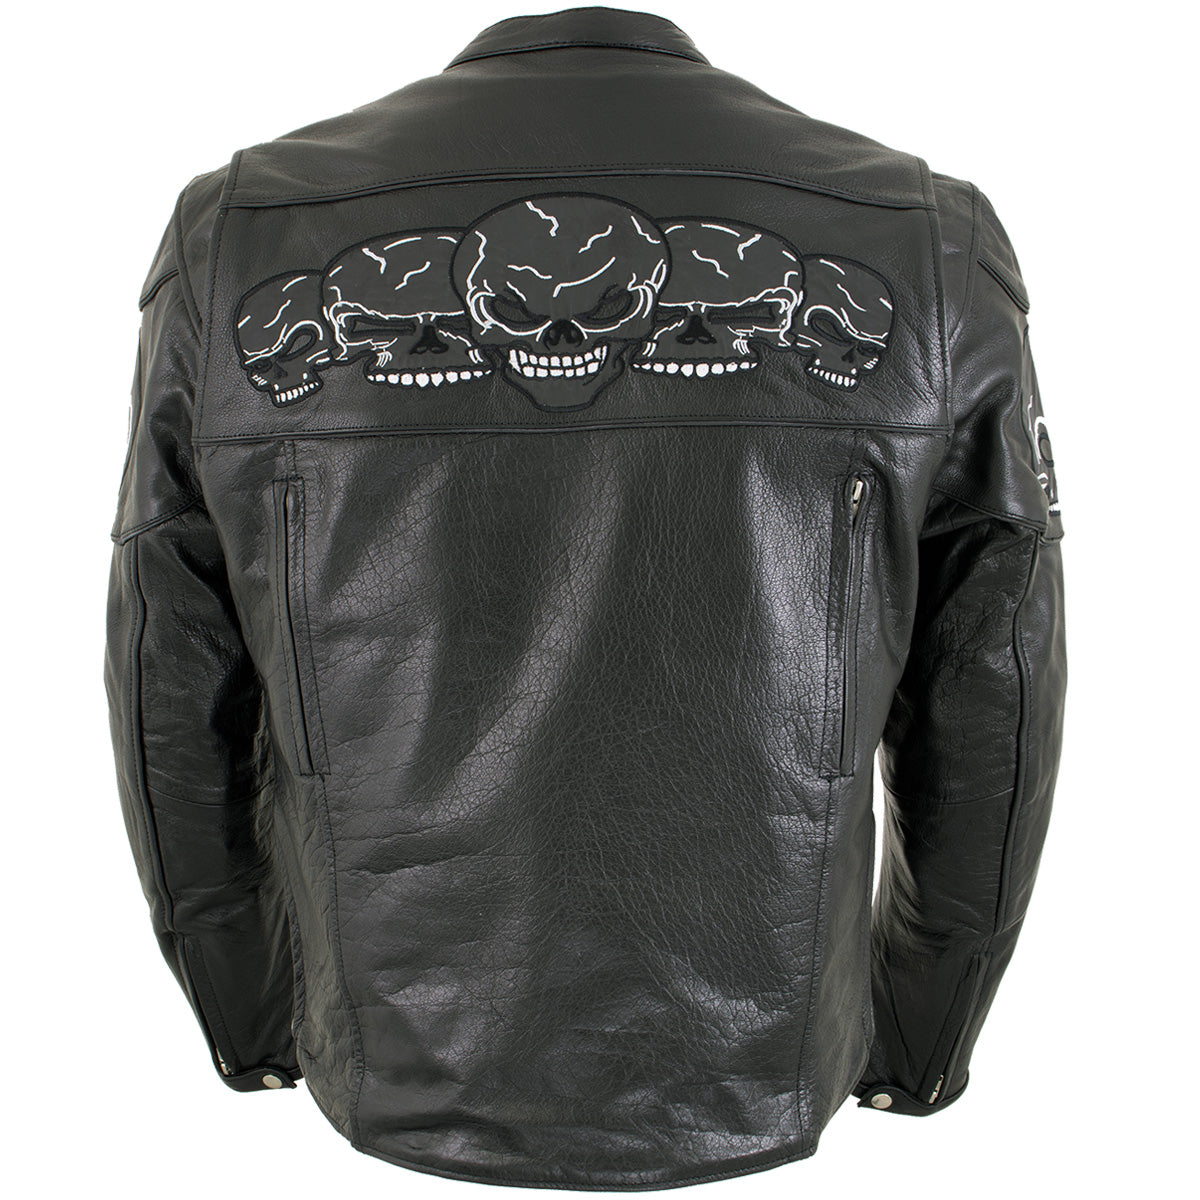 Xelement BXU6050 Men's '3 Skull Head' Black Leather Motorcycle Jacket with X-Armor Protection